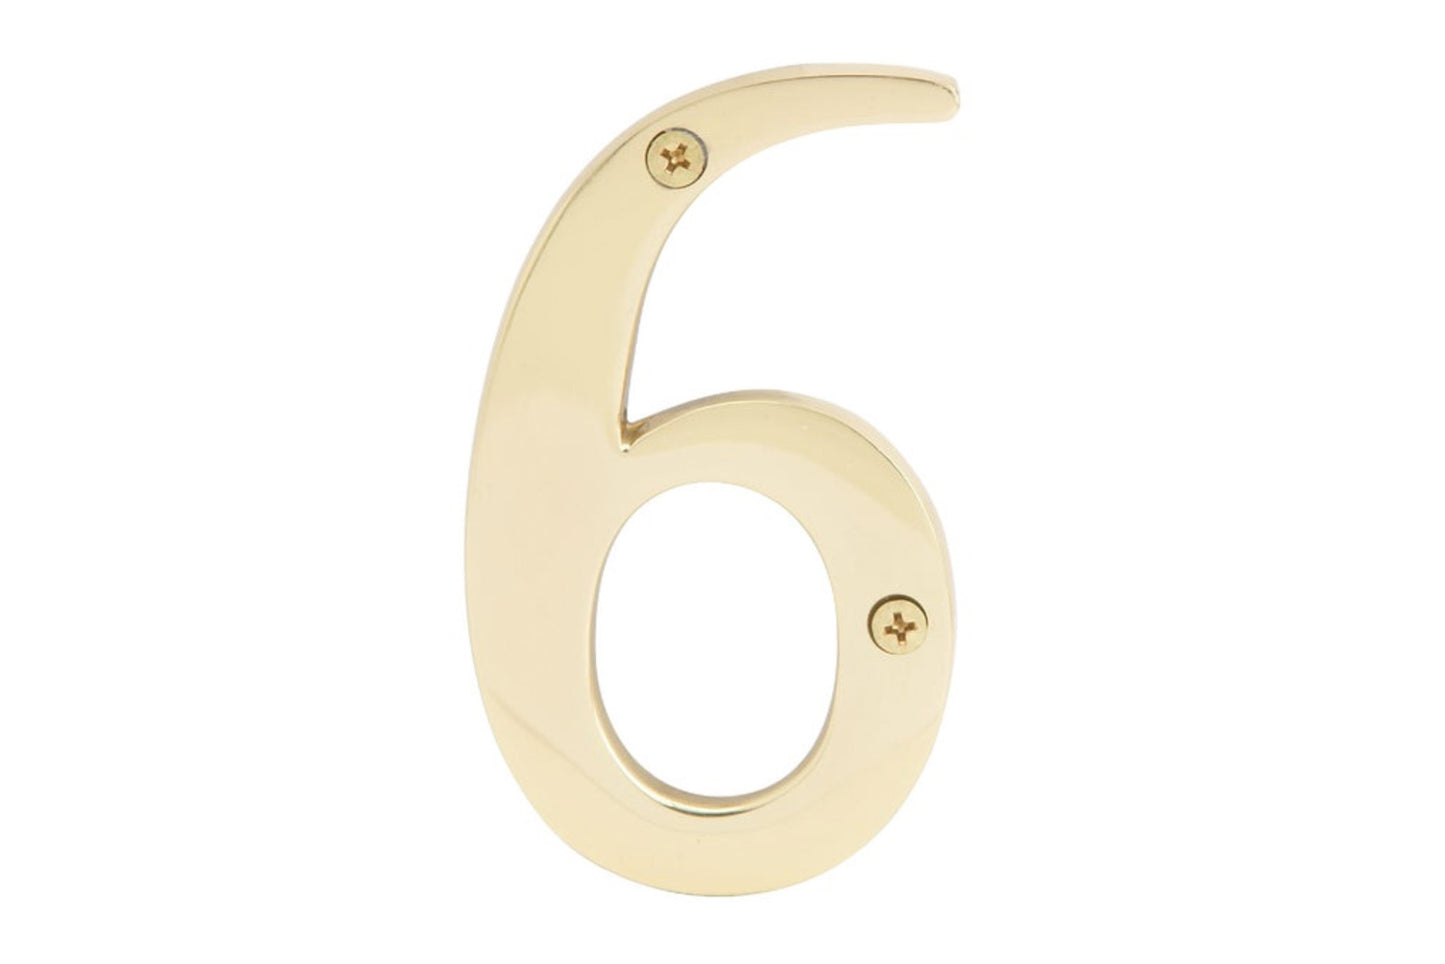 Number Six Solid Brass House Number in a 4" Size. Made of solid brass material - 1/4" thickness. Lacquered brass finish. Includes two flat head phillips screws. #6 House Number. Hy-Ko Model No. BR-90/6. 029069104962